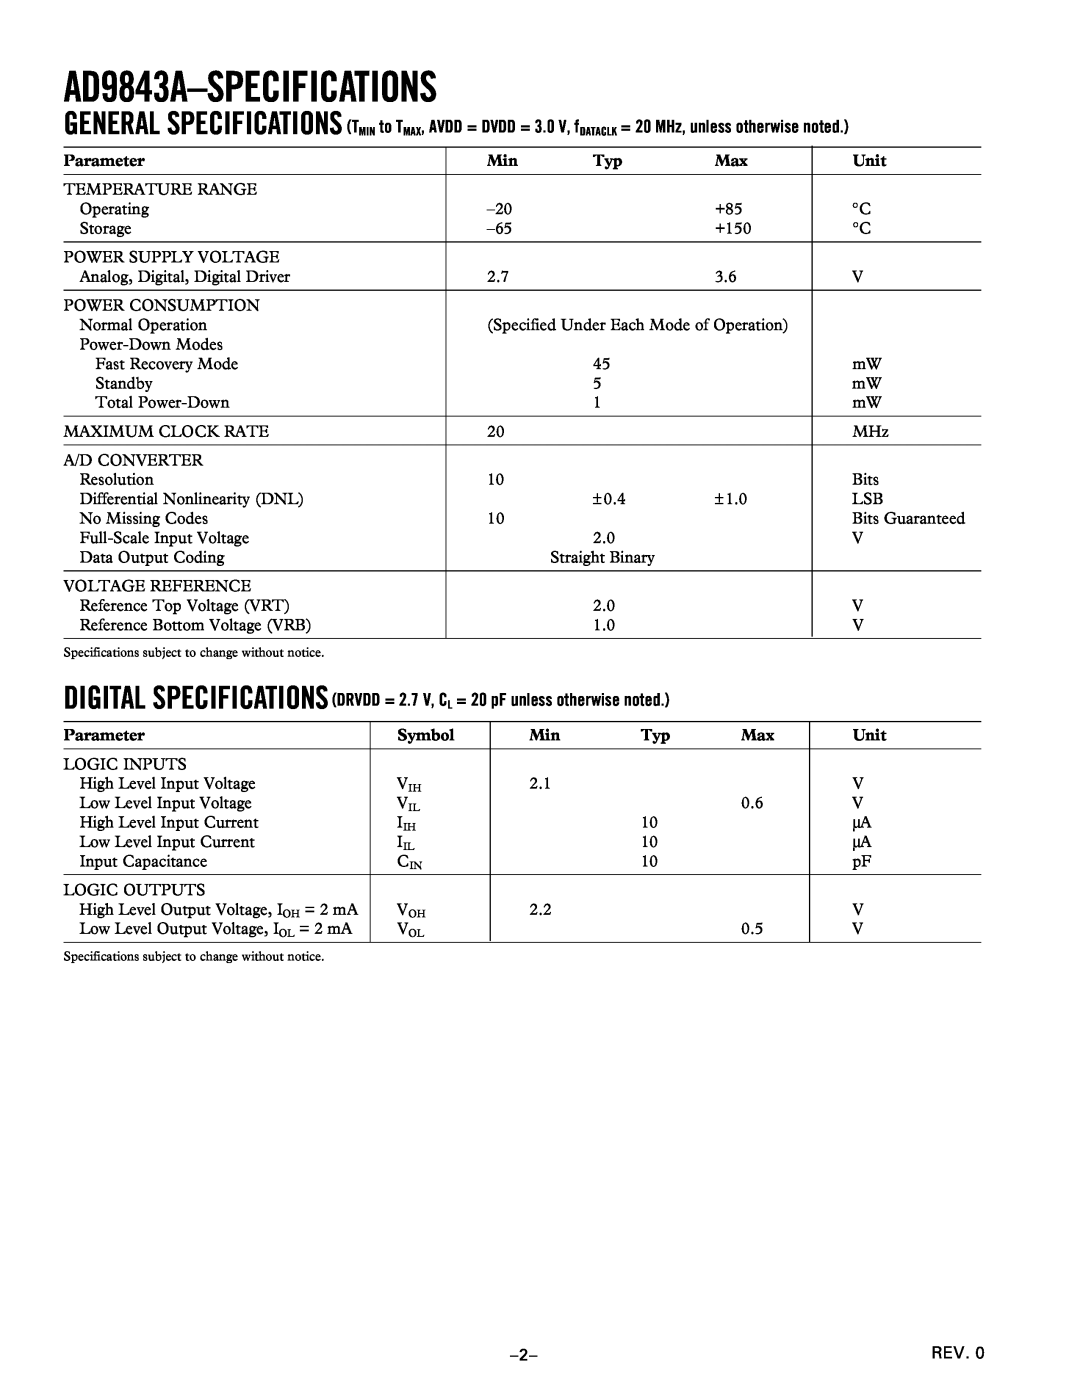 Analog Devices manual AD9843A-SPECIFICATIONS 